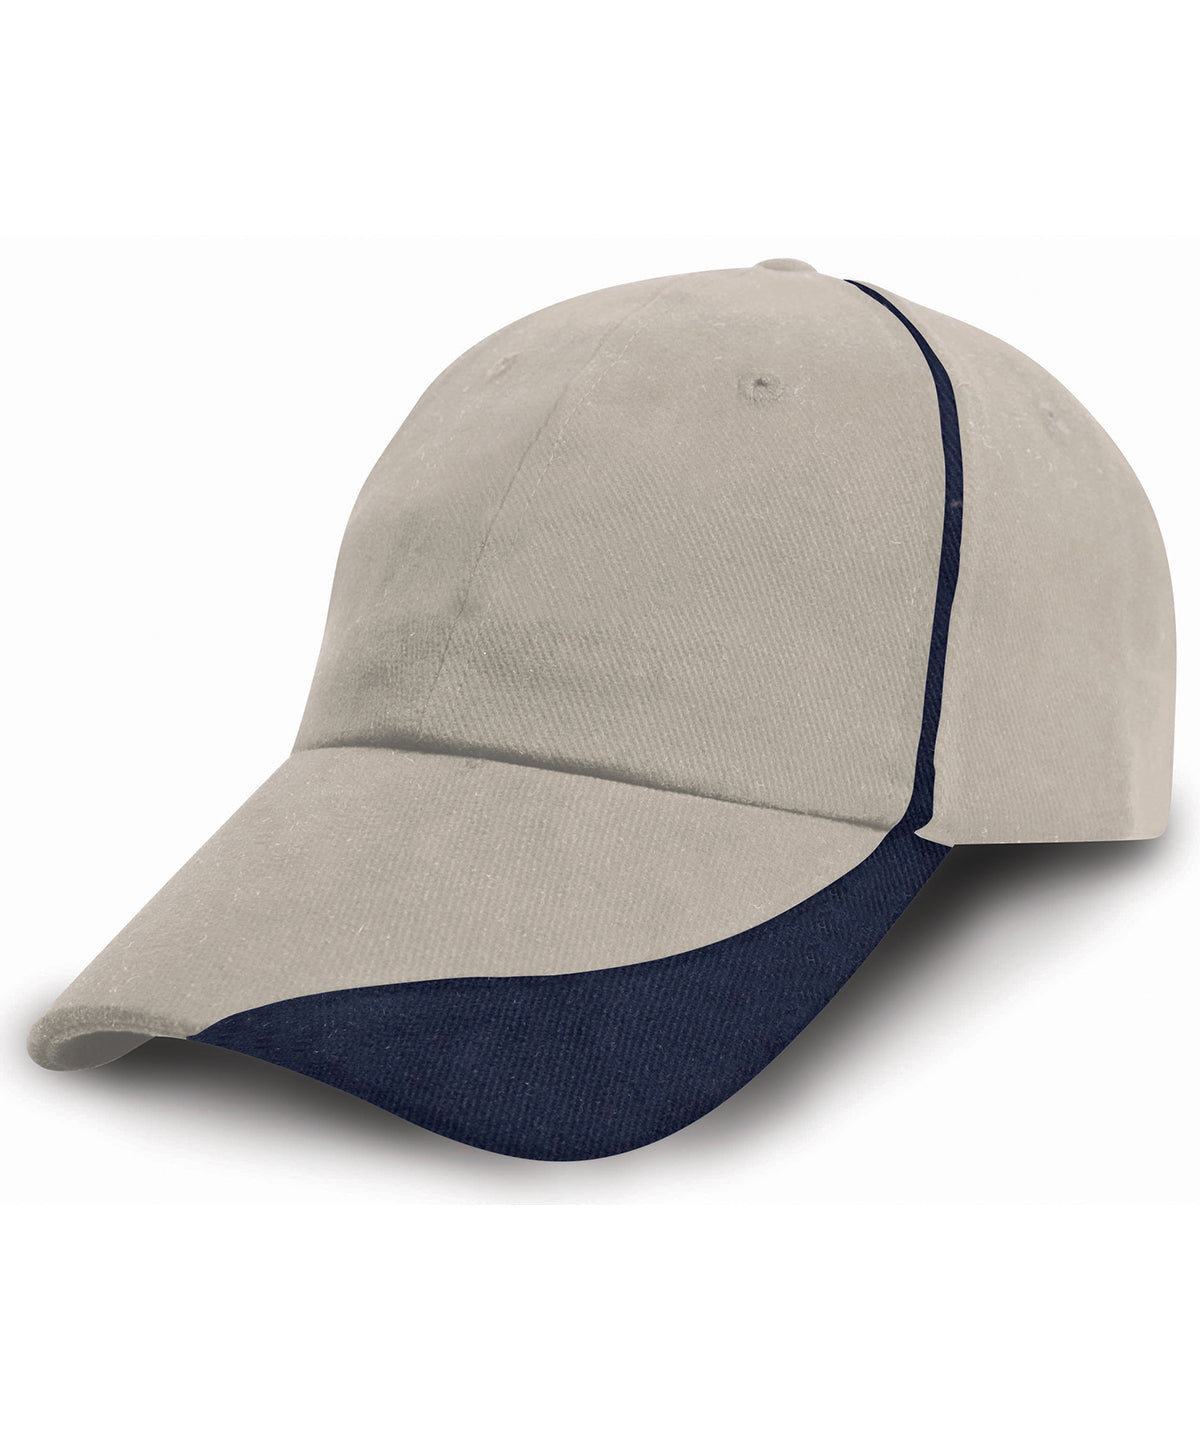 Result Heavy Brushed Cotton Cap With Scallop Peak And Contrast Trim